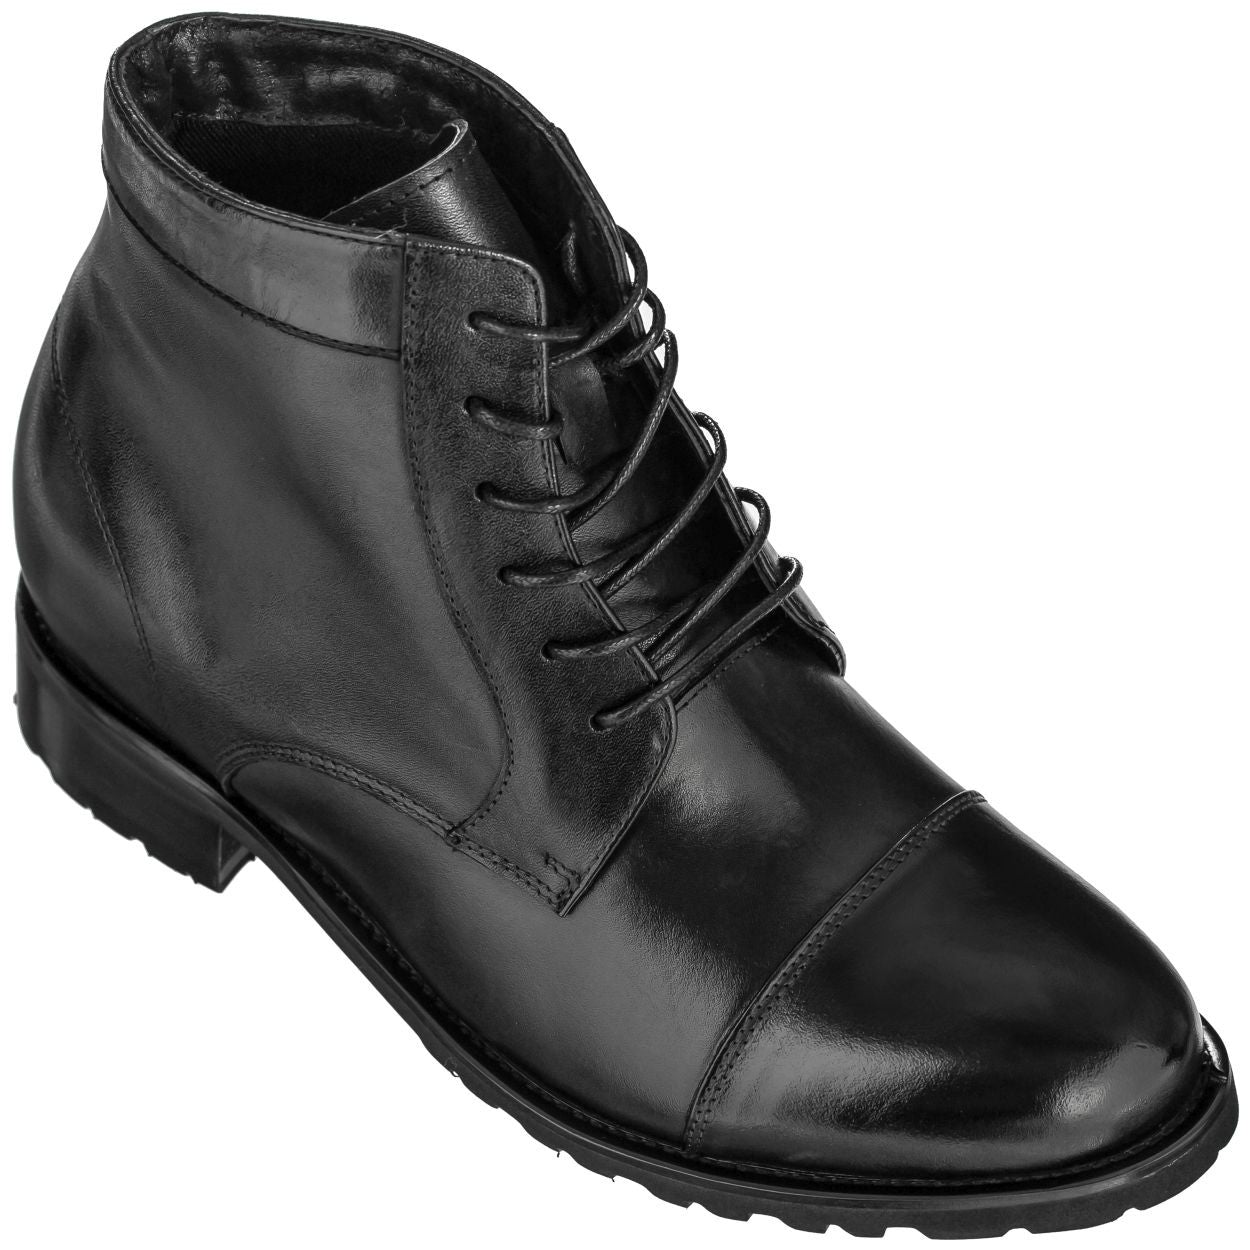 Elevator shoes height increase CALTO - T5203 - 3.6 Inches Taller (Black)